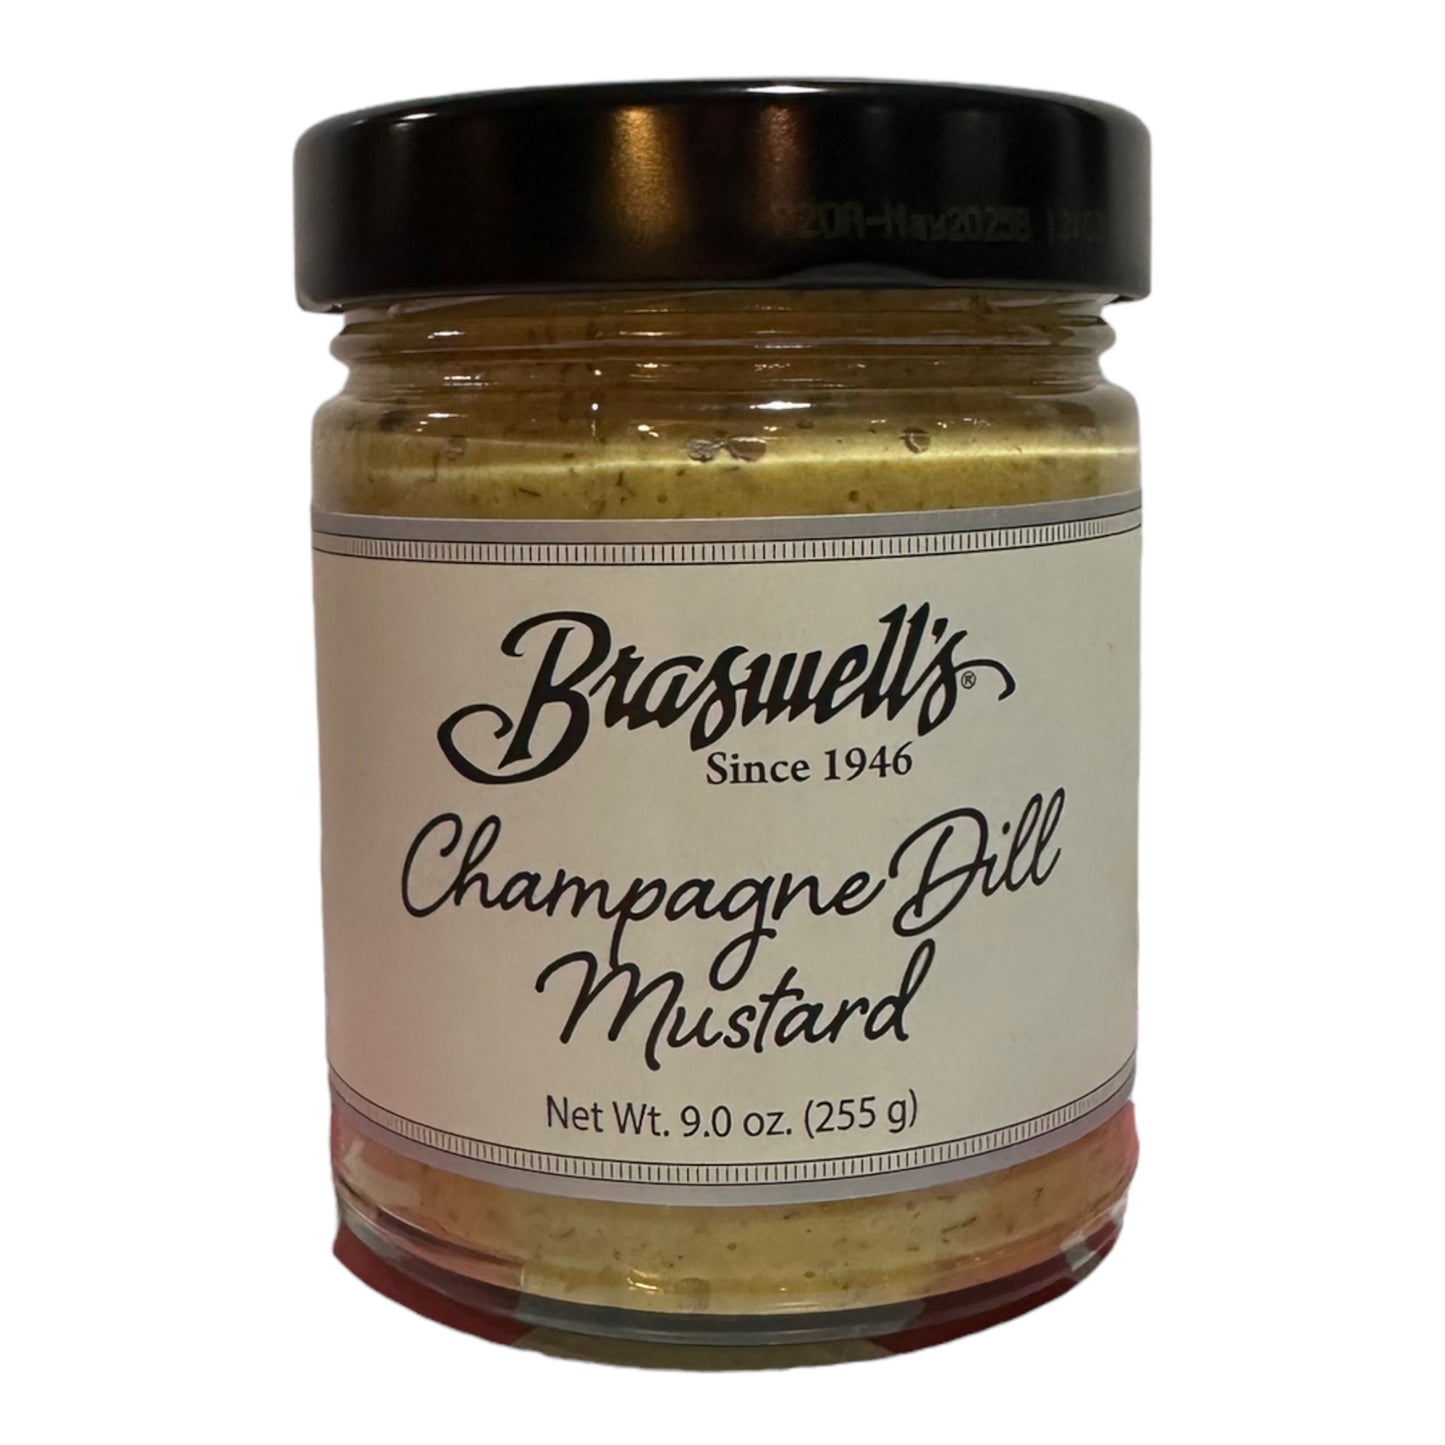 BRASWELL'S CHAMPAGNE DILL MUSTARD